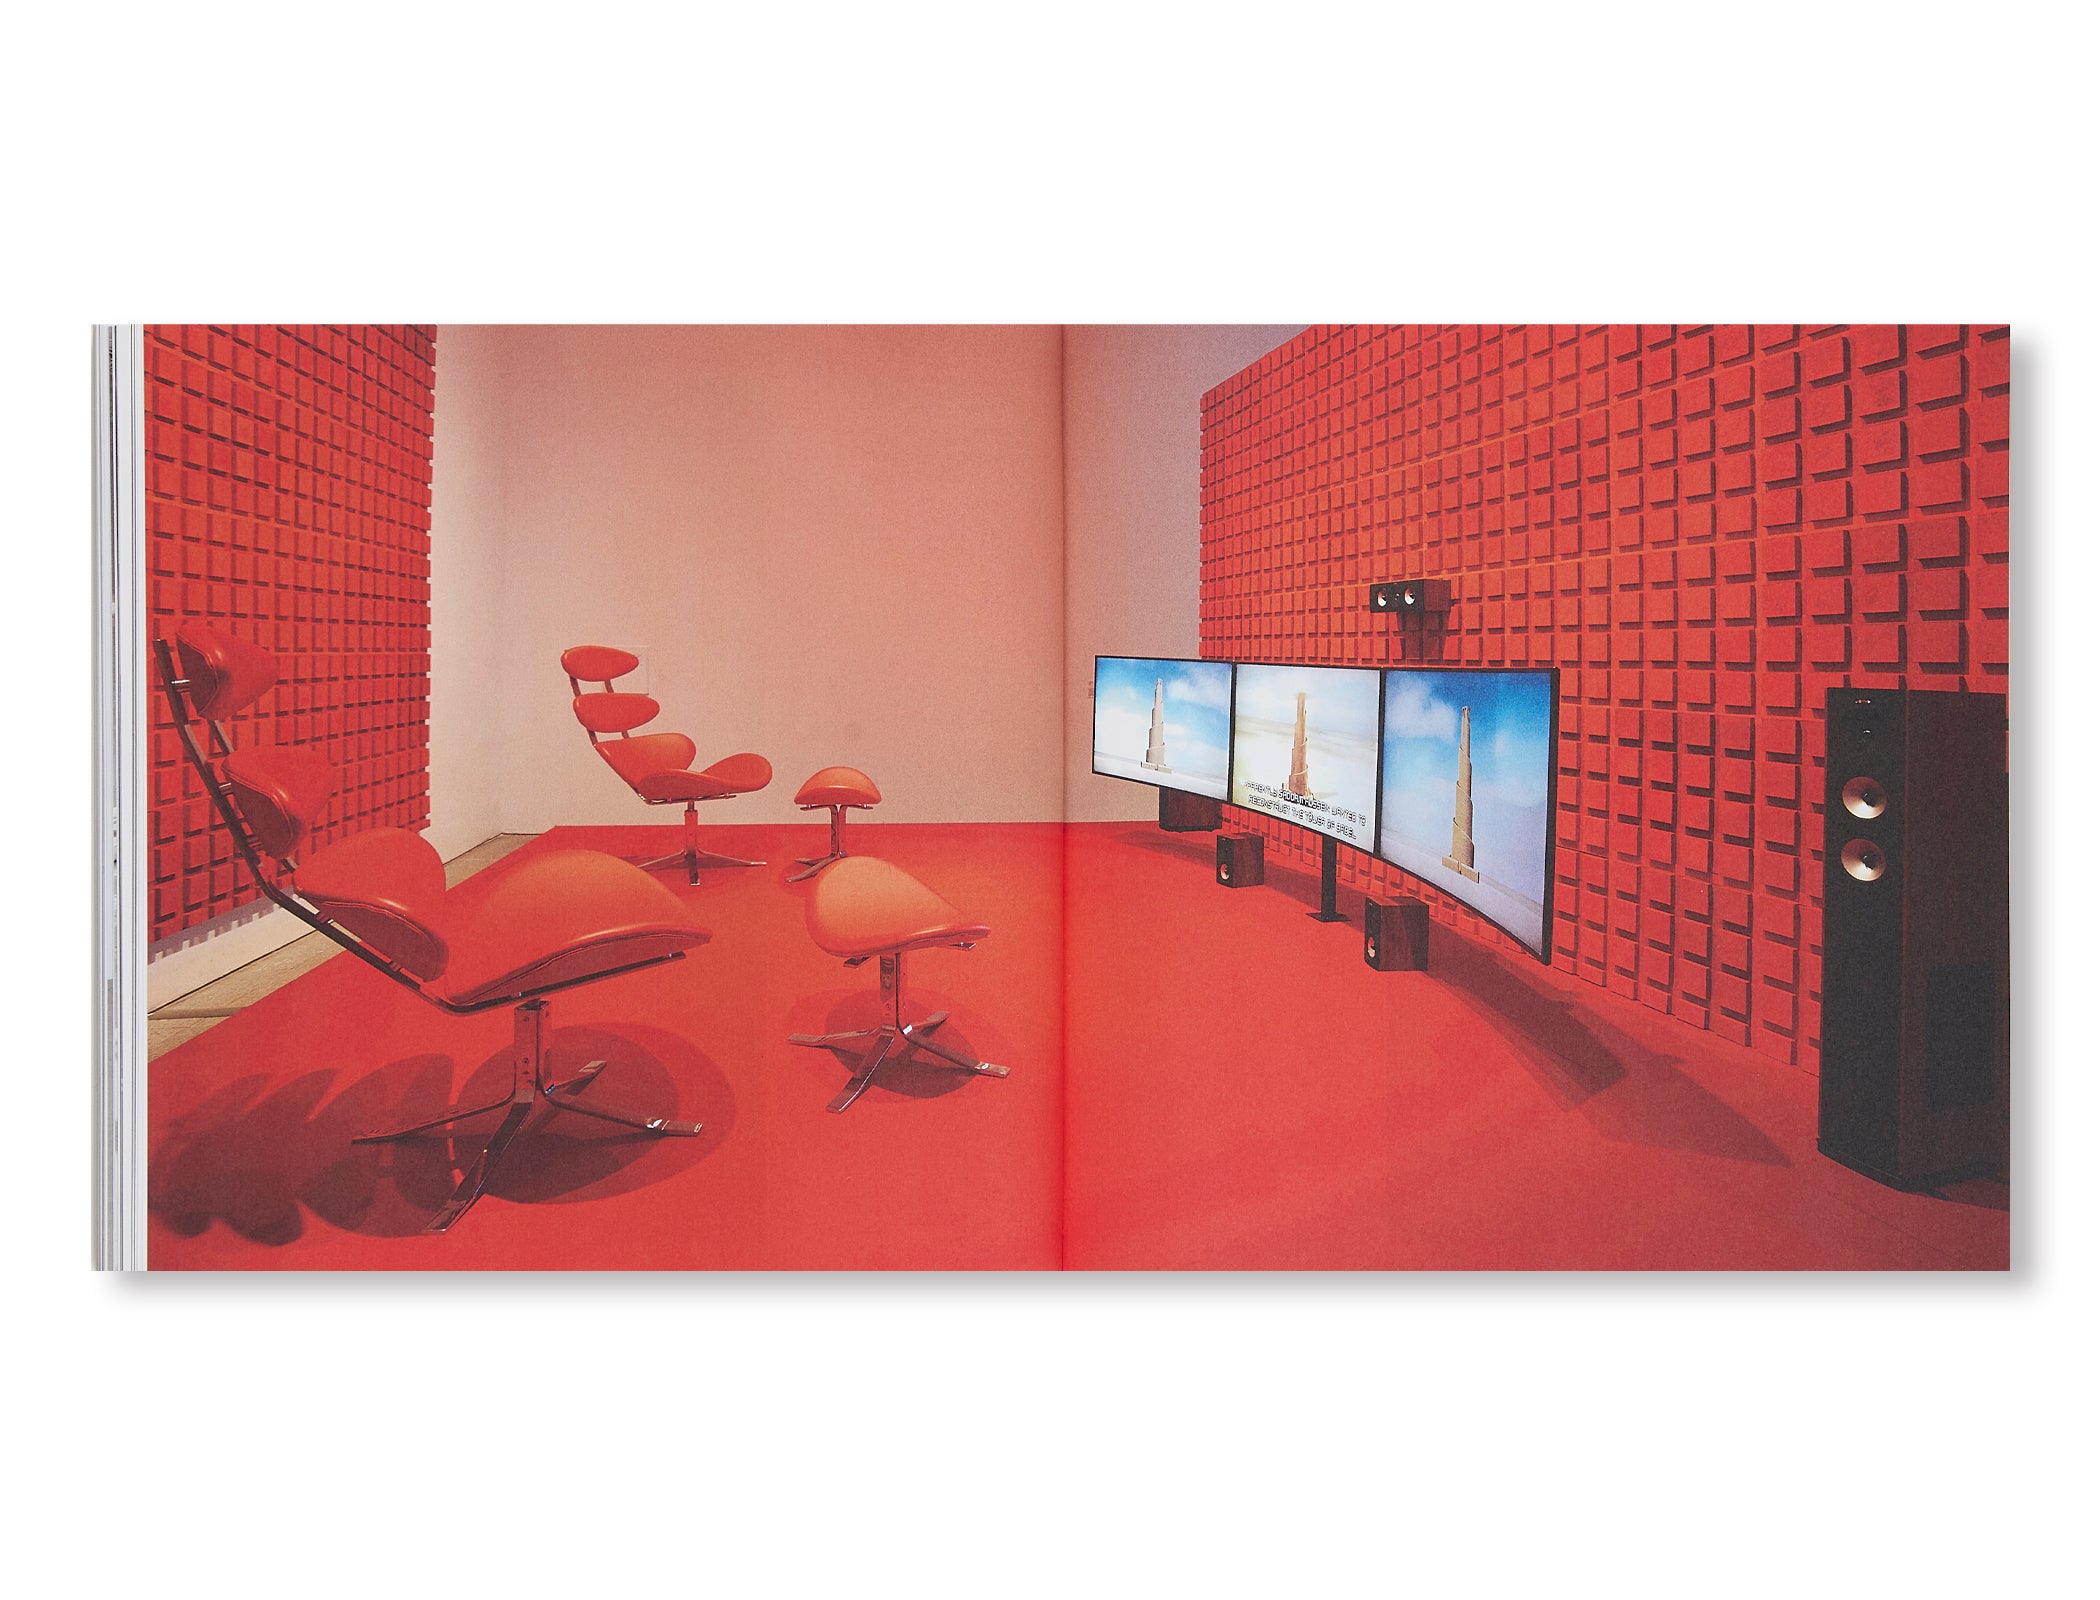 THIS IS THE FUTURE by Hito Steyerl